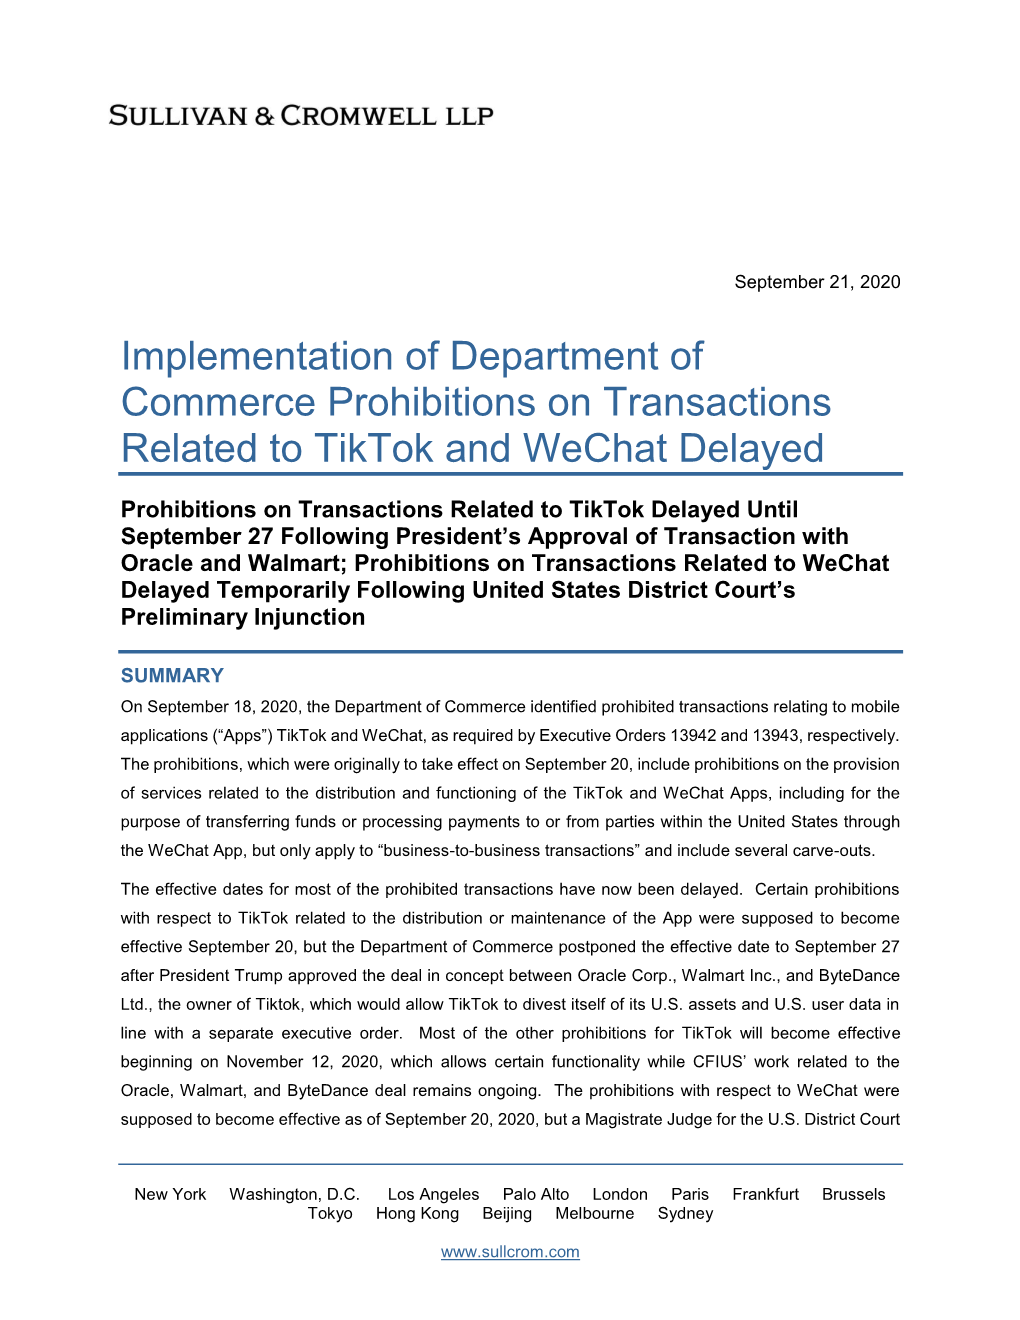 Implementation of Department of Commerce Prohibitions on Transactions Related to Tiktok and Wechat Delayed